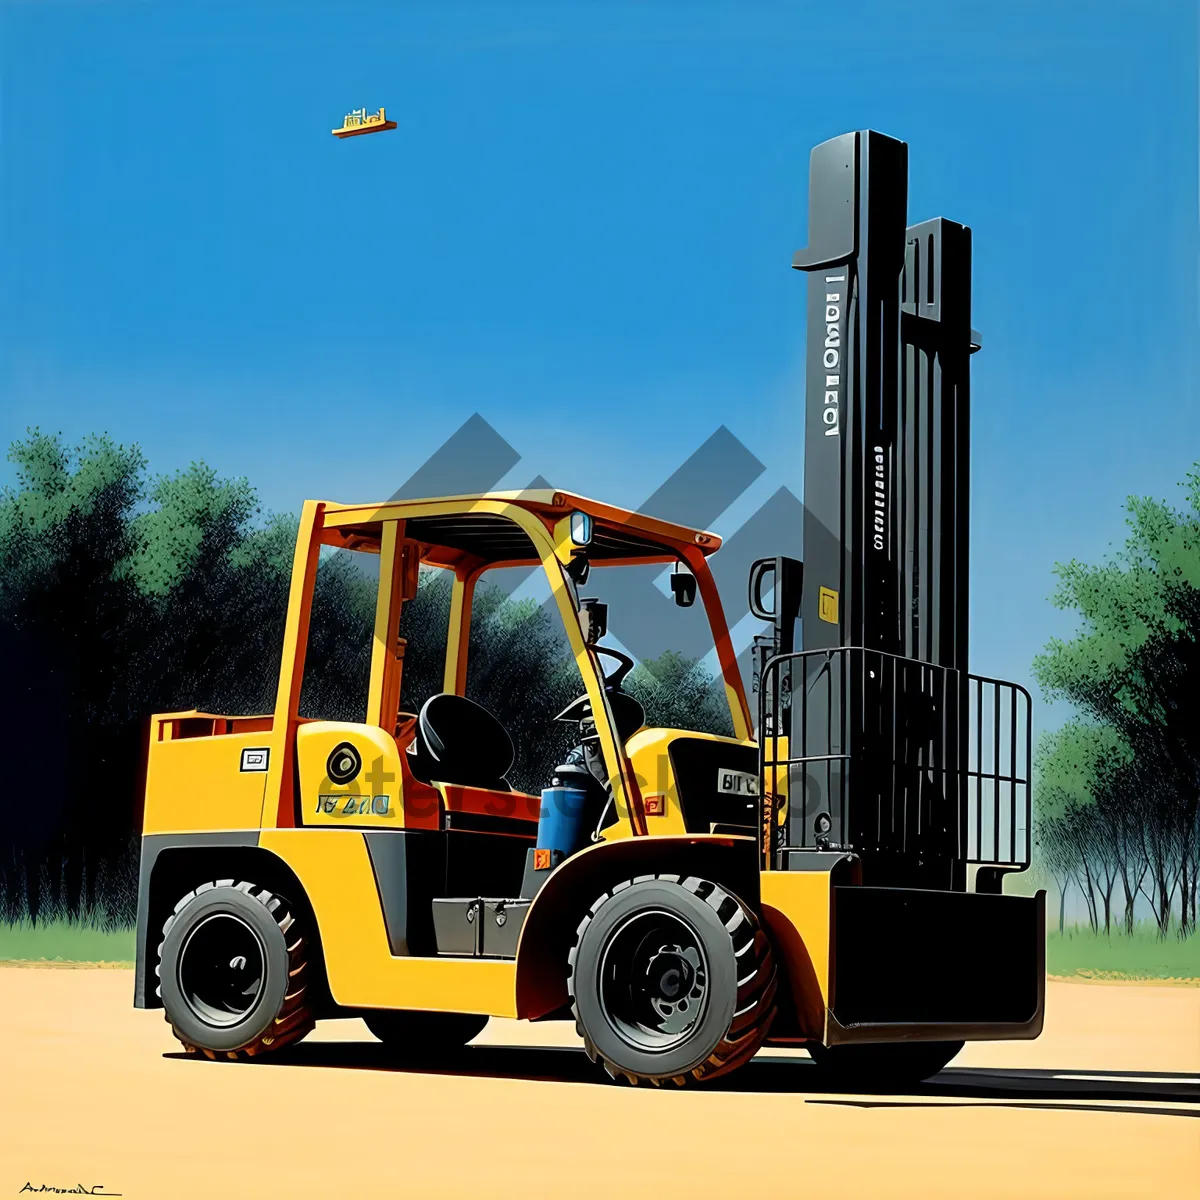 Picture of Yellow Heavy Duty Forklift on Construction Site